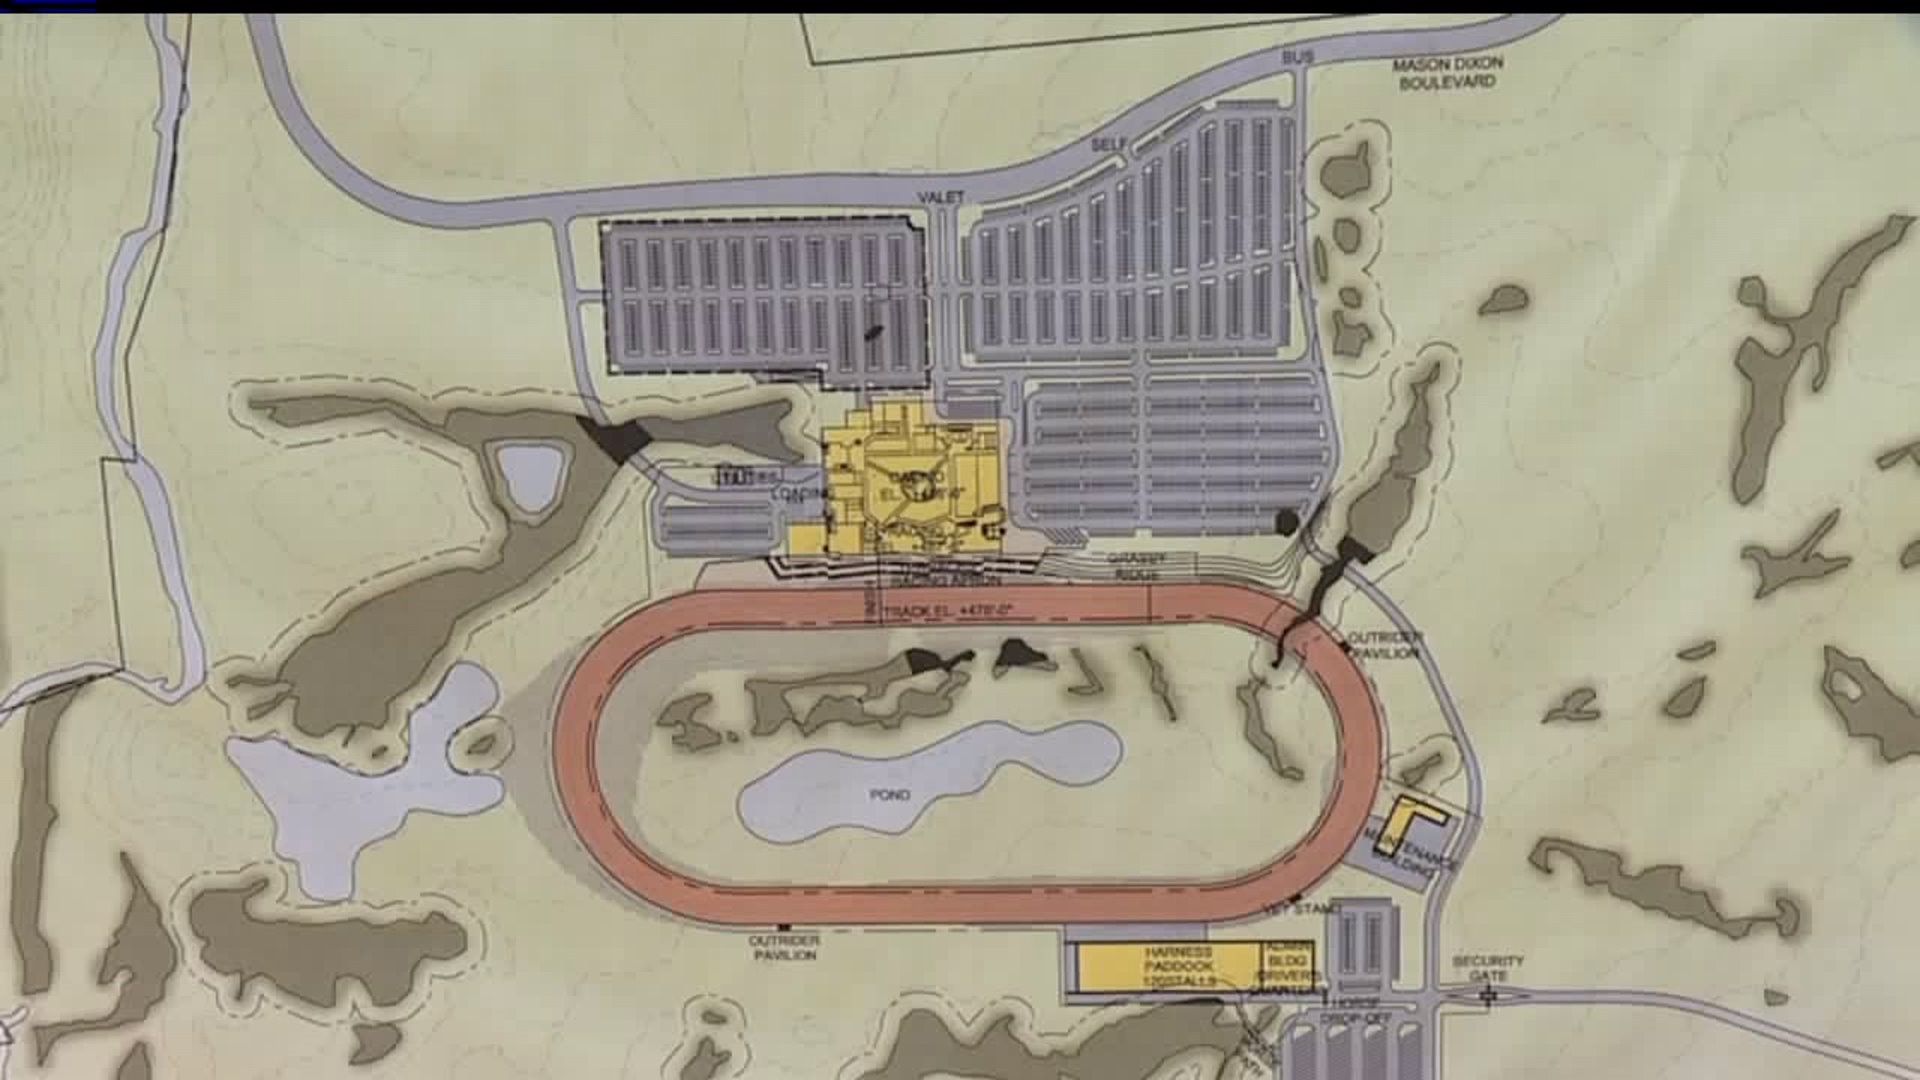 Proposed casino in Adams County dropped